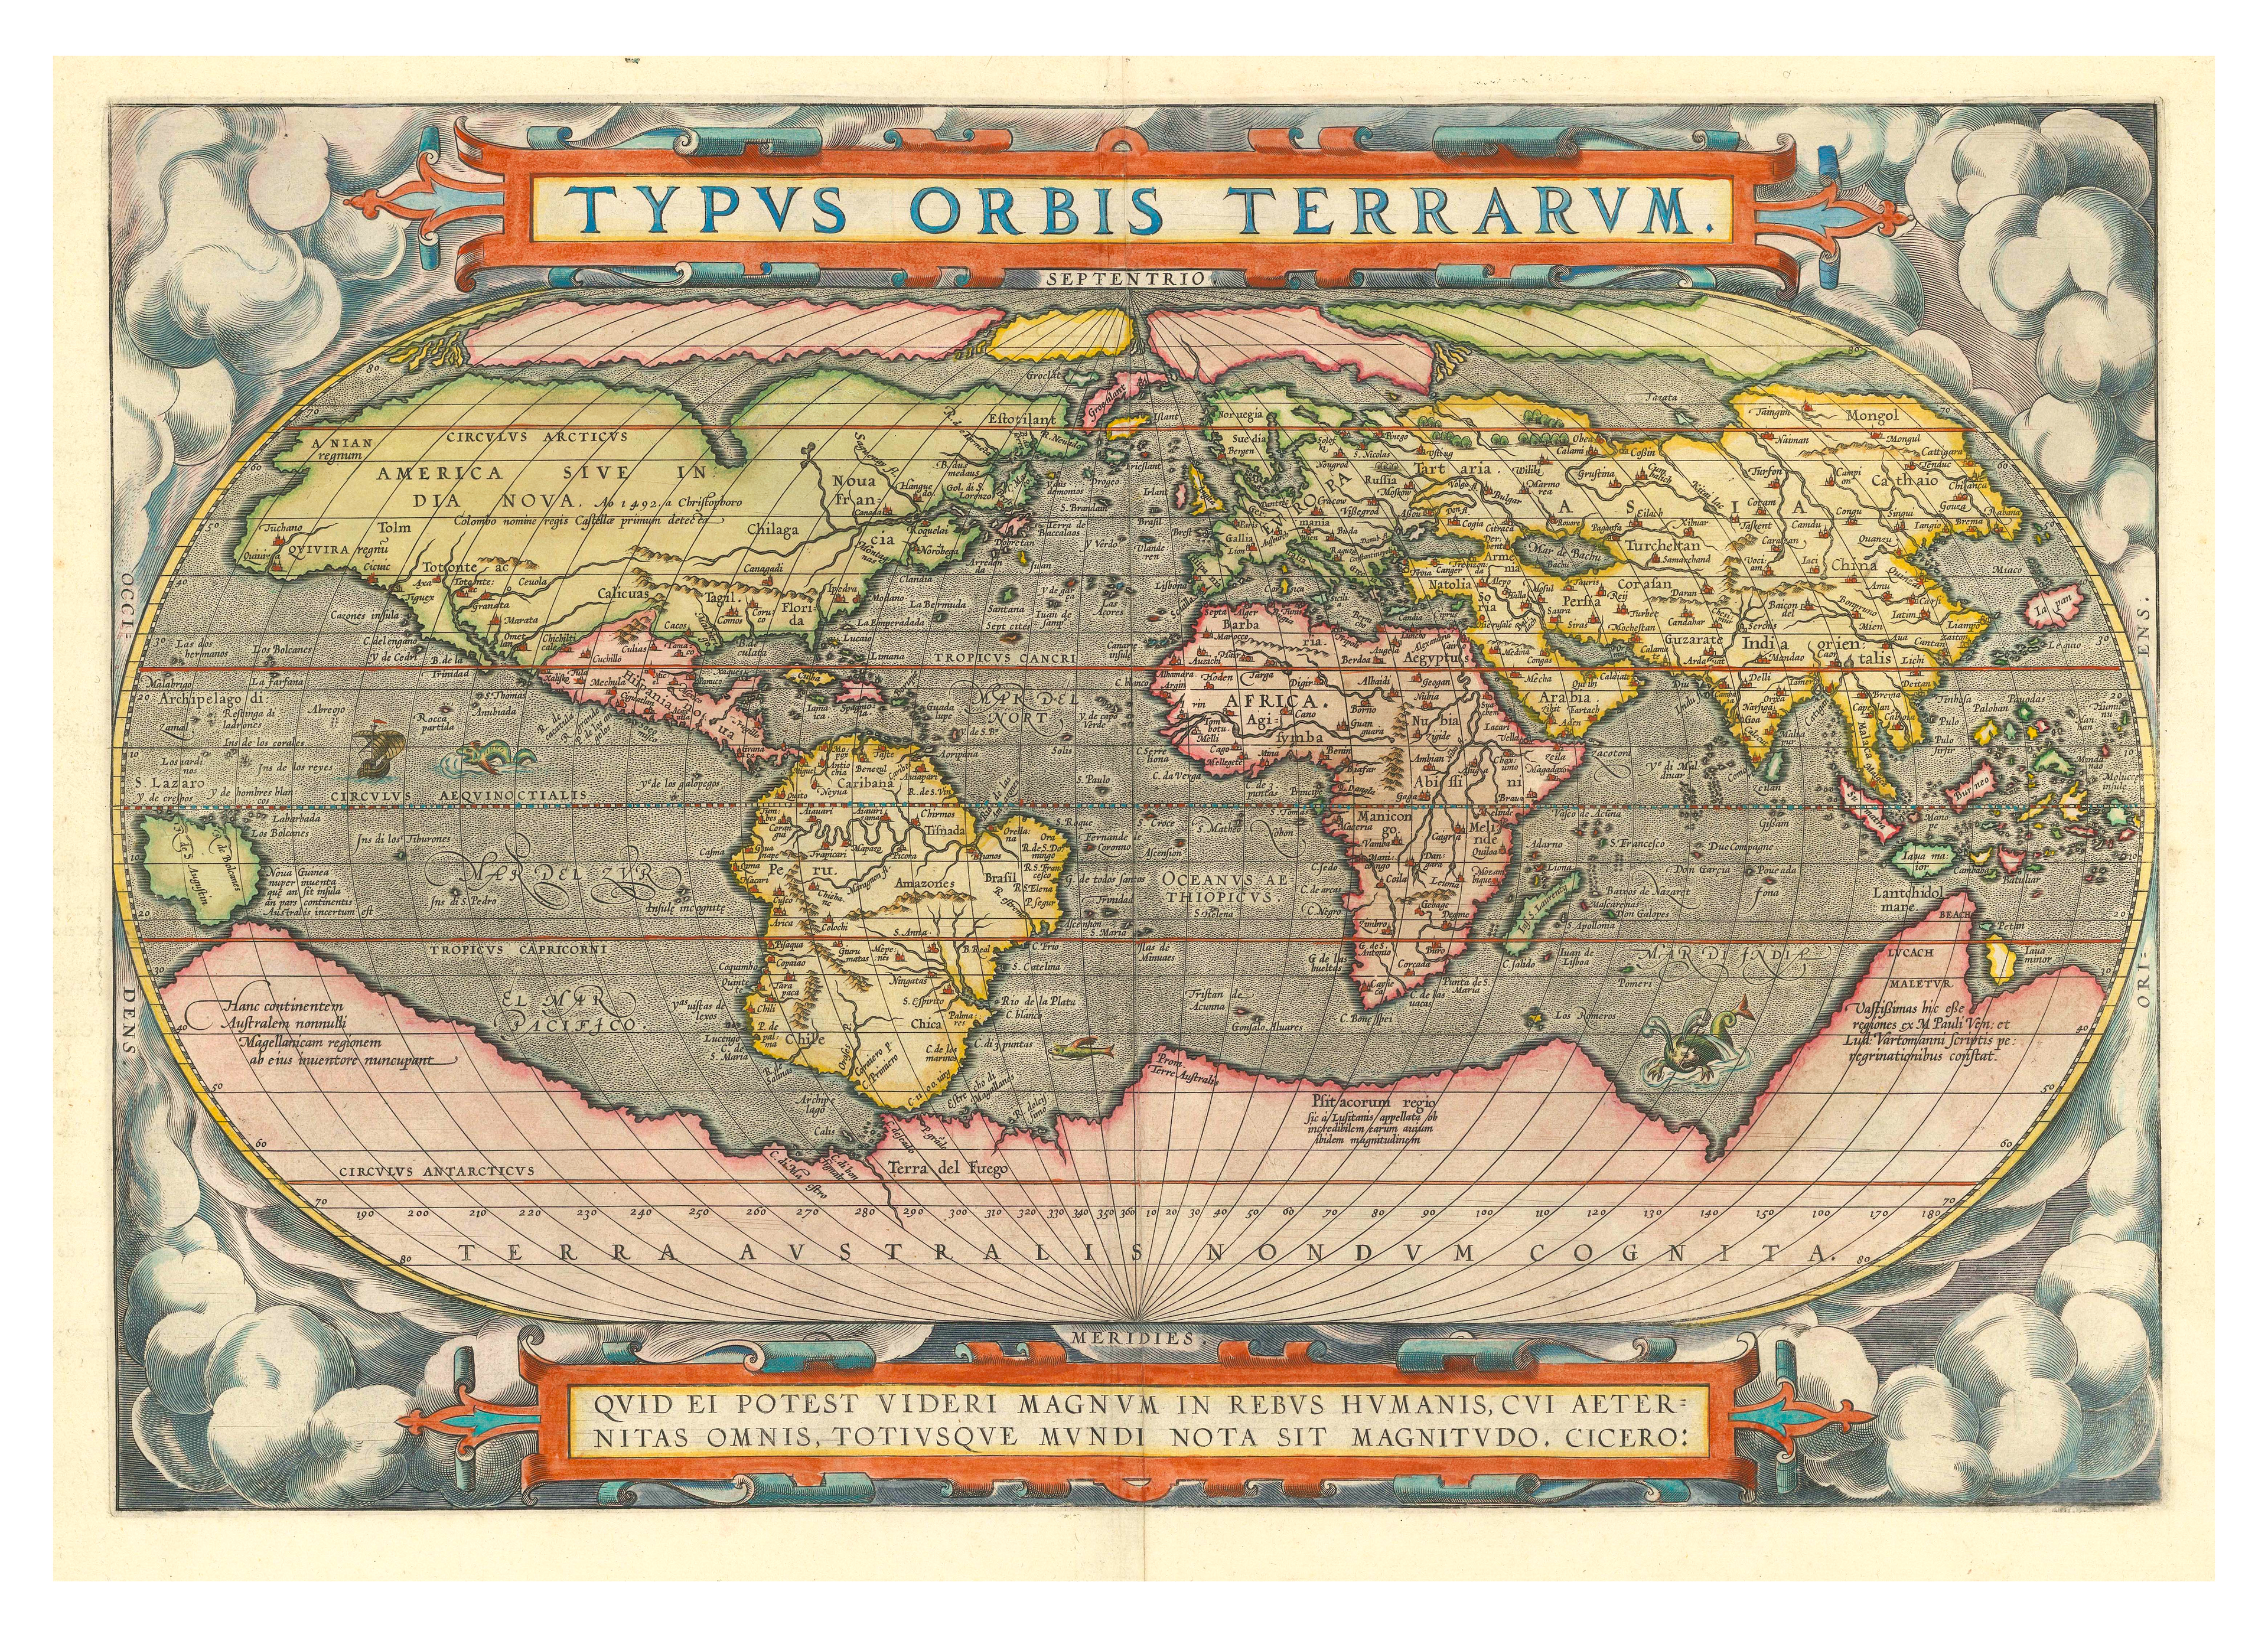 Preview of Ortelius' world map, the map is surrounded by illustrations of clouds and has text at the top which reads: Typus Orbis Terrarum.